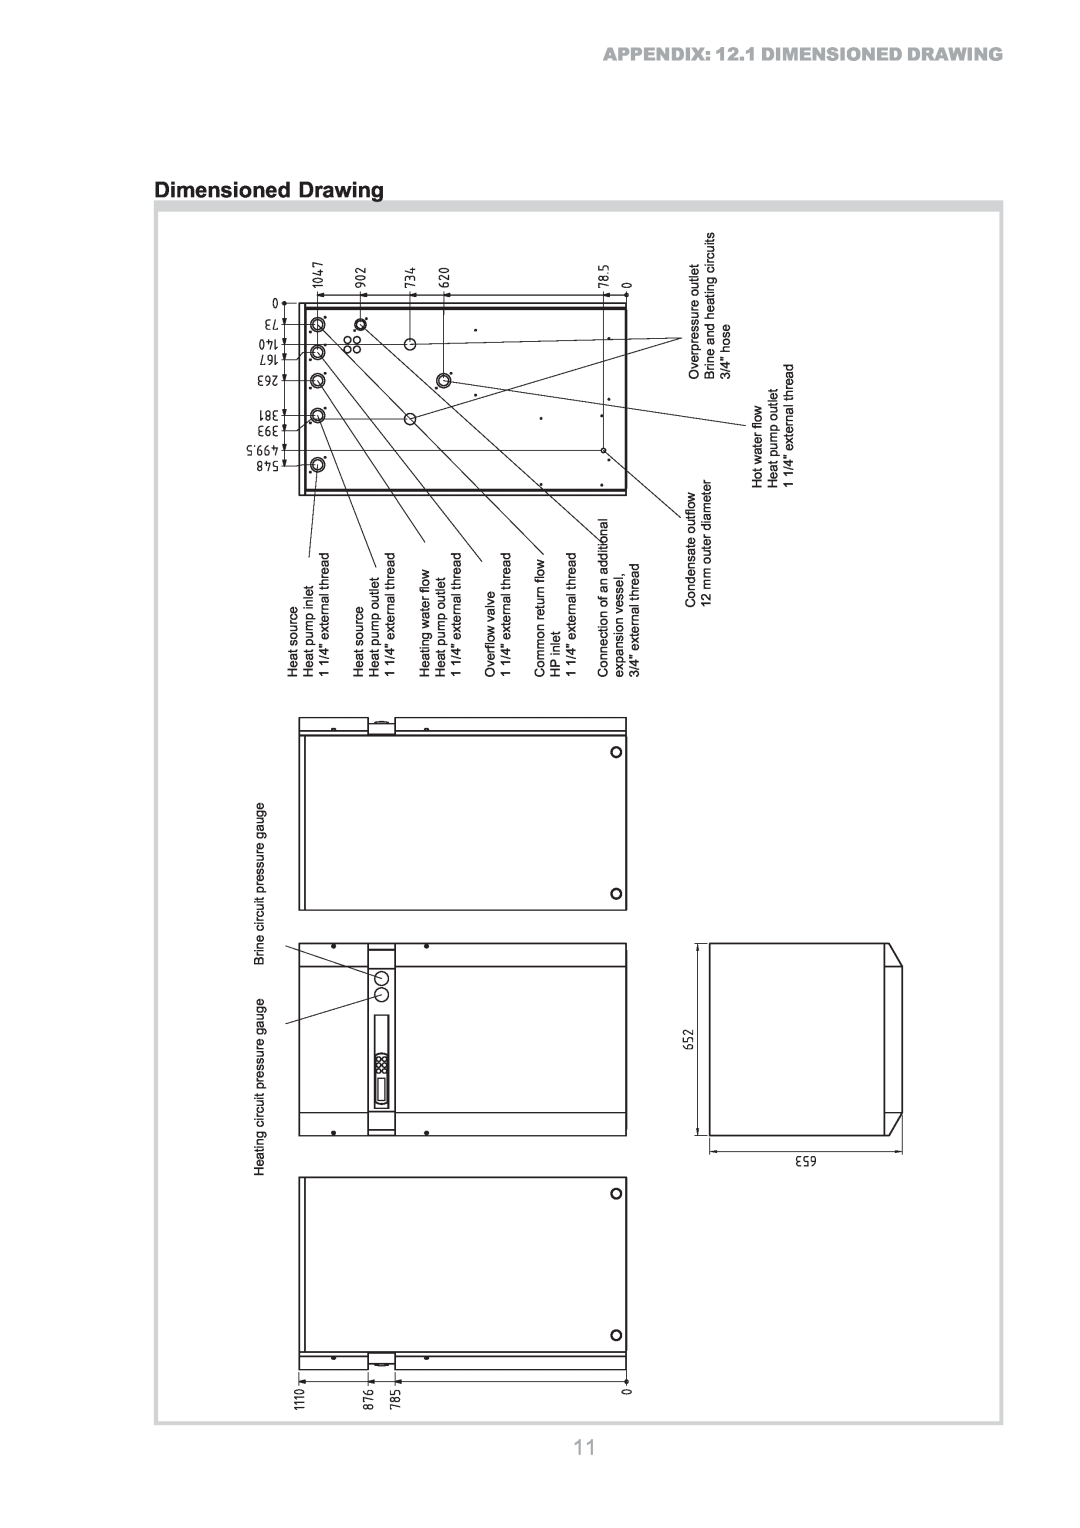 Dimplex S1 7KS operating instructions Dimensioned Drawing, 12. 1 Maßbilder, APPENDIX 12.1 DIMENSIONED DRAWING 